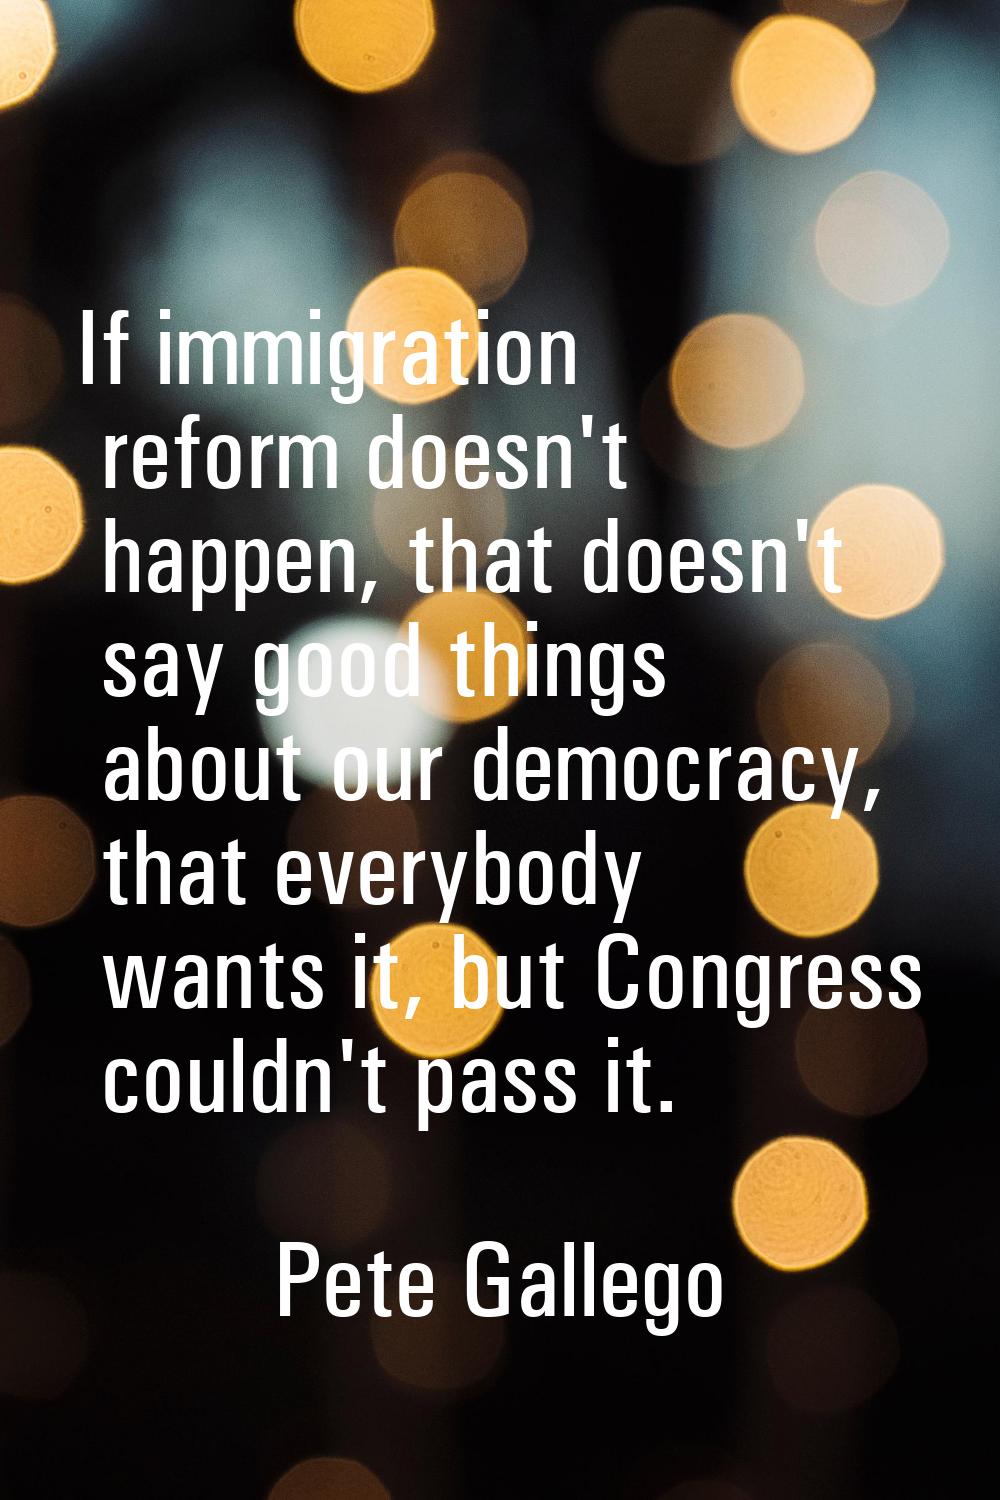 If immigration reform doesn't happen, that doesn't say good things about our democracy, that everyb